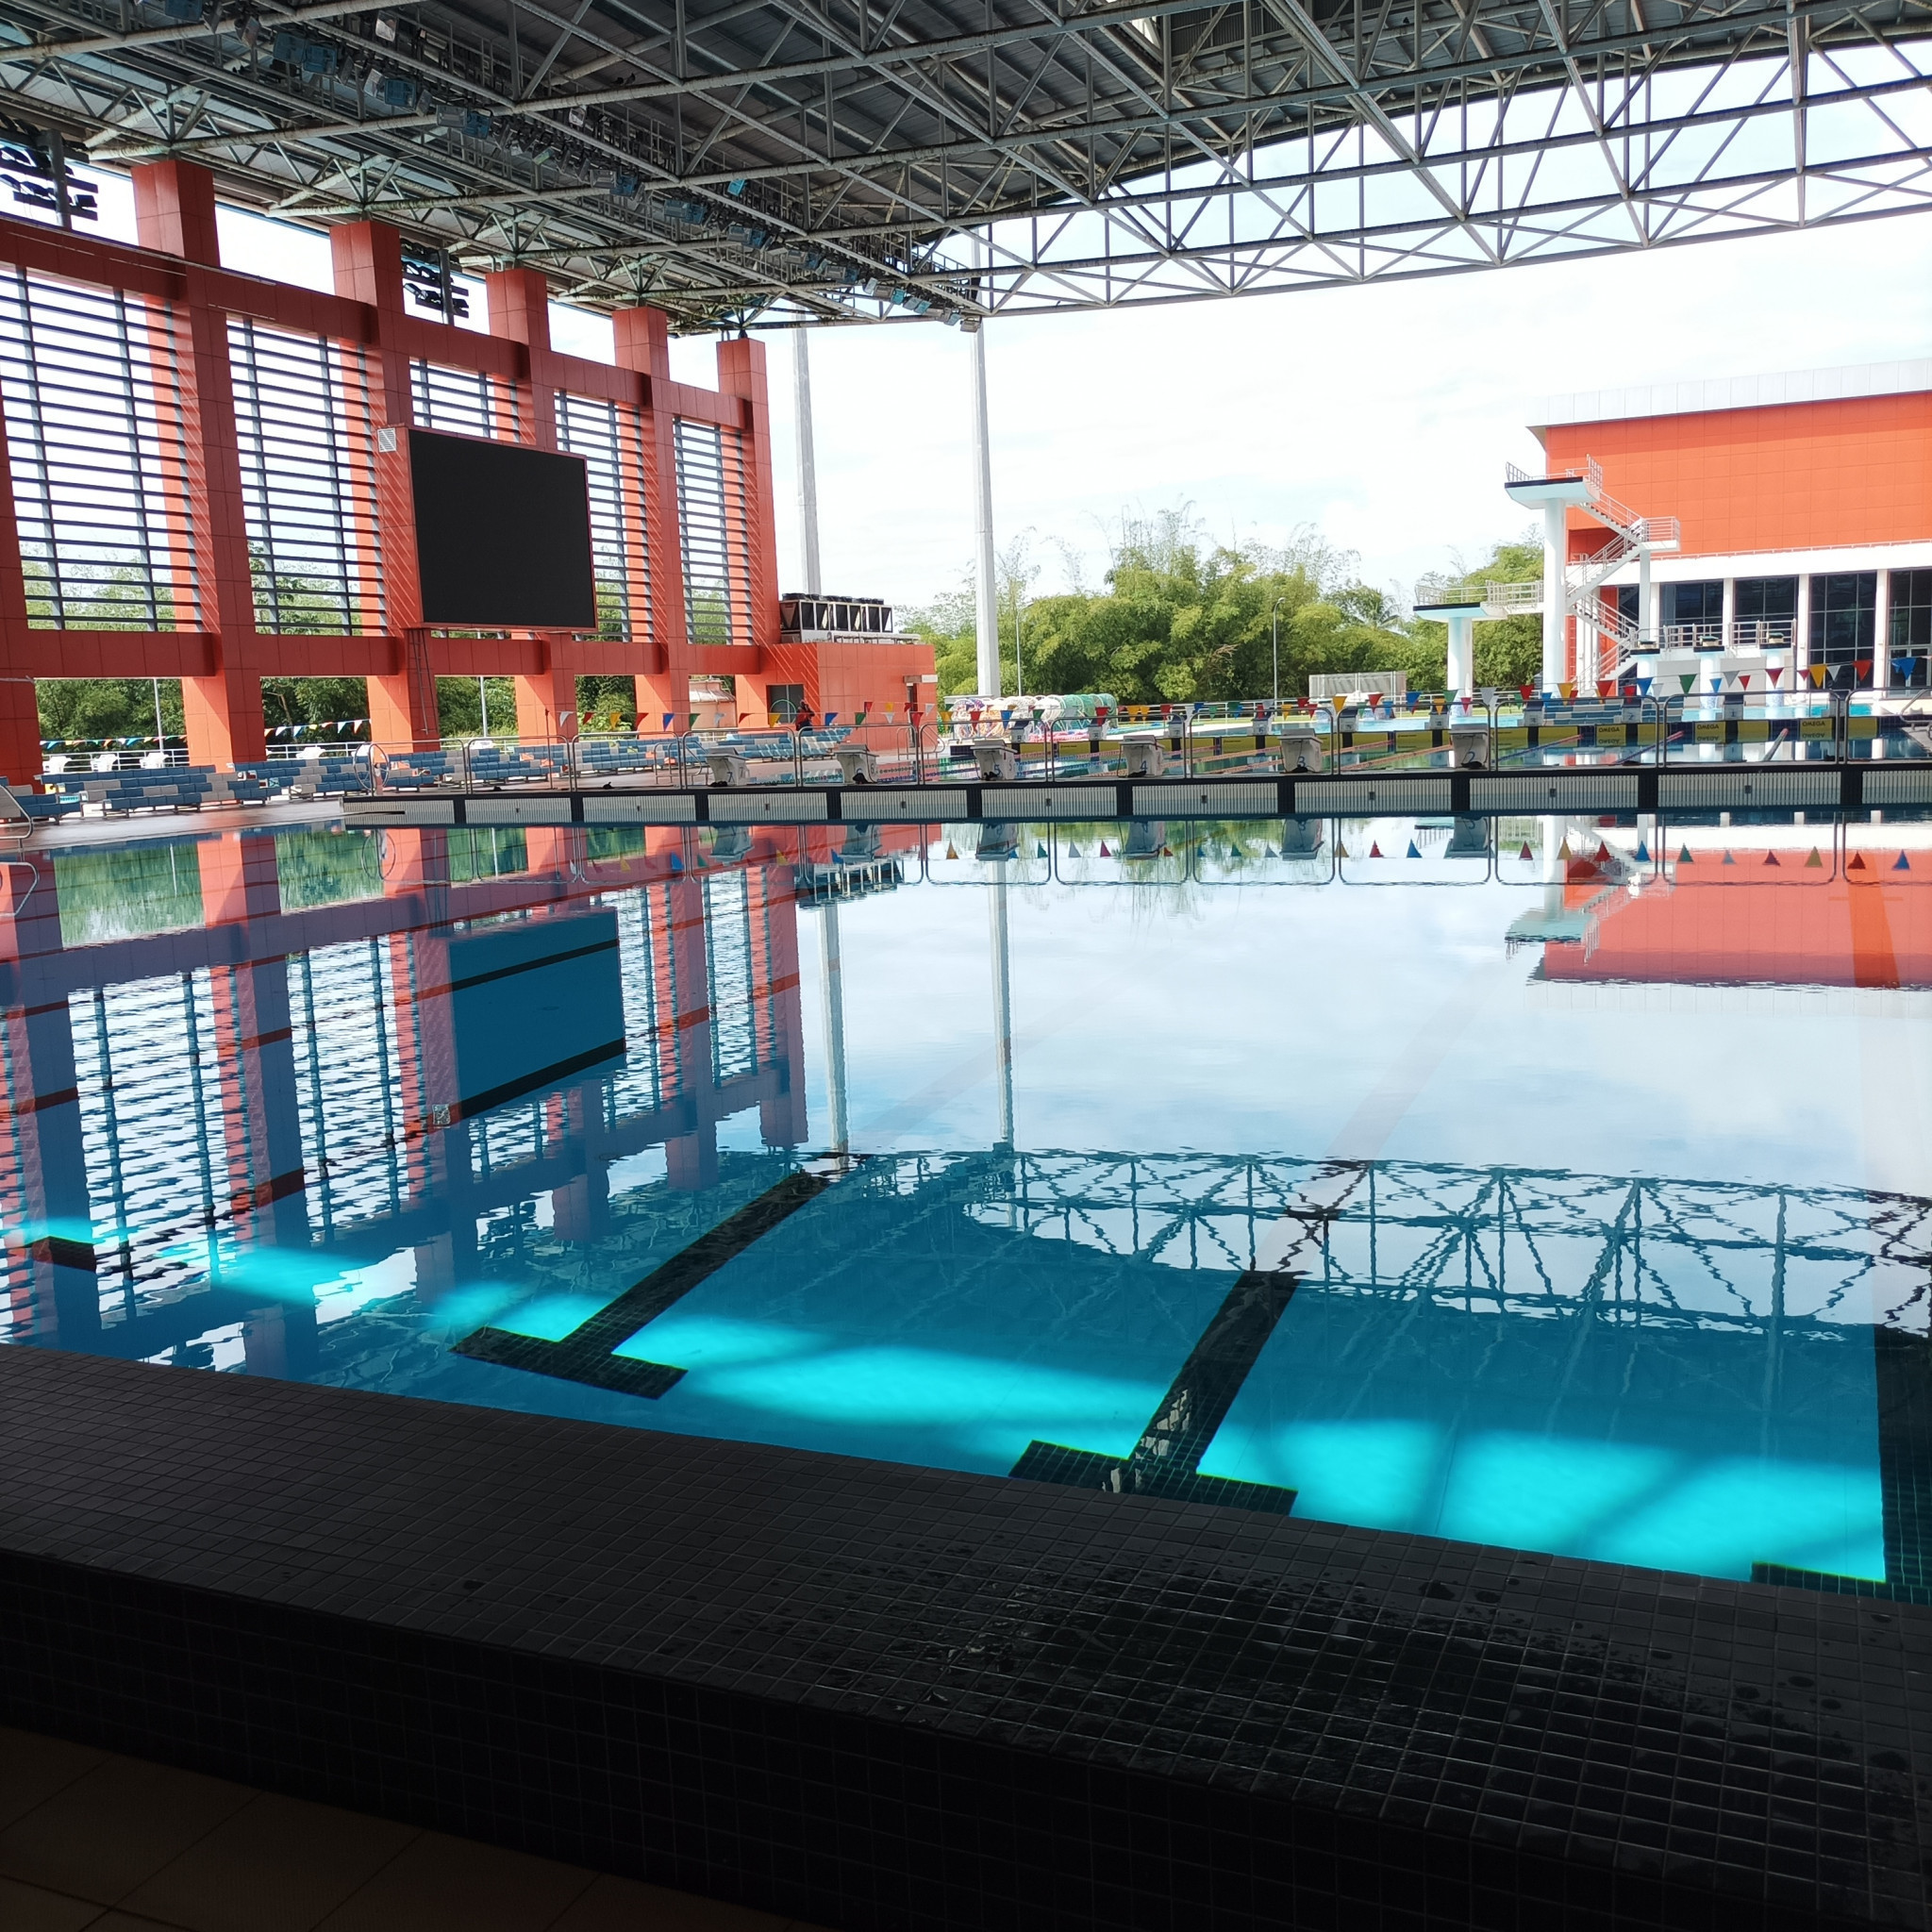 The Aquatics Centre at Couva on the outskirts of Port of Spain is set to be a key venue for Trinbago 2023 ©ITG